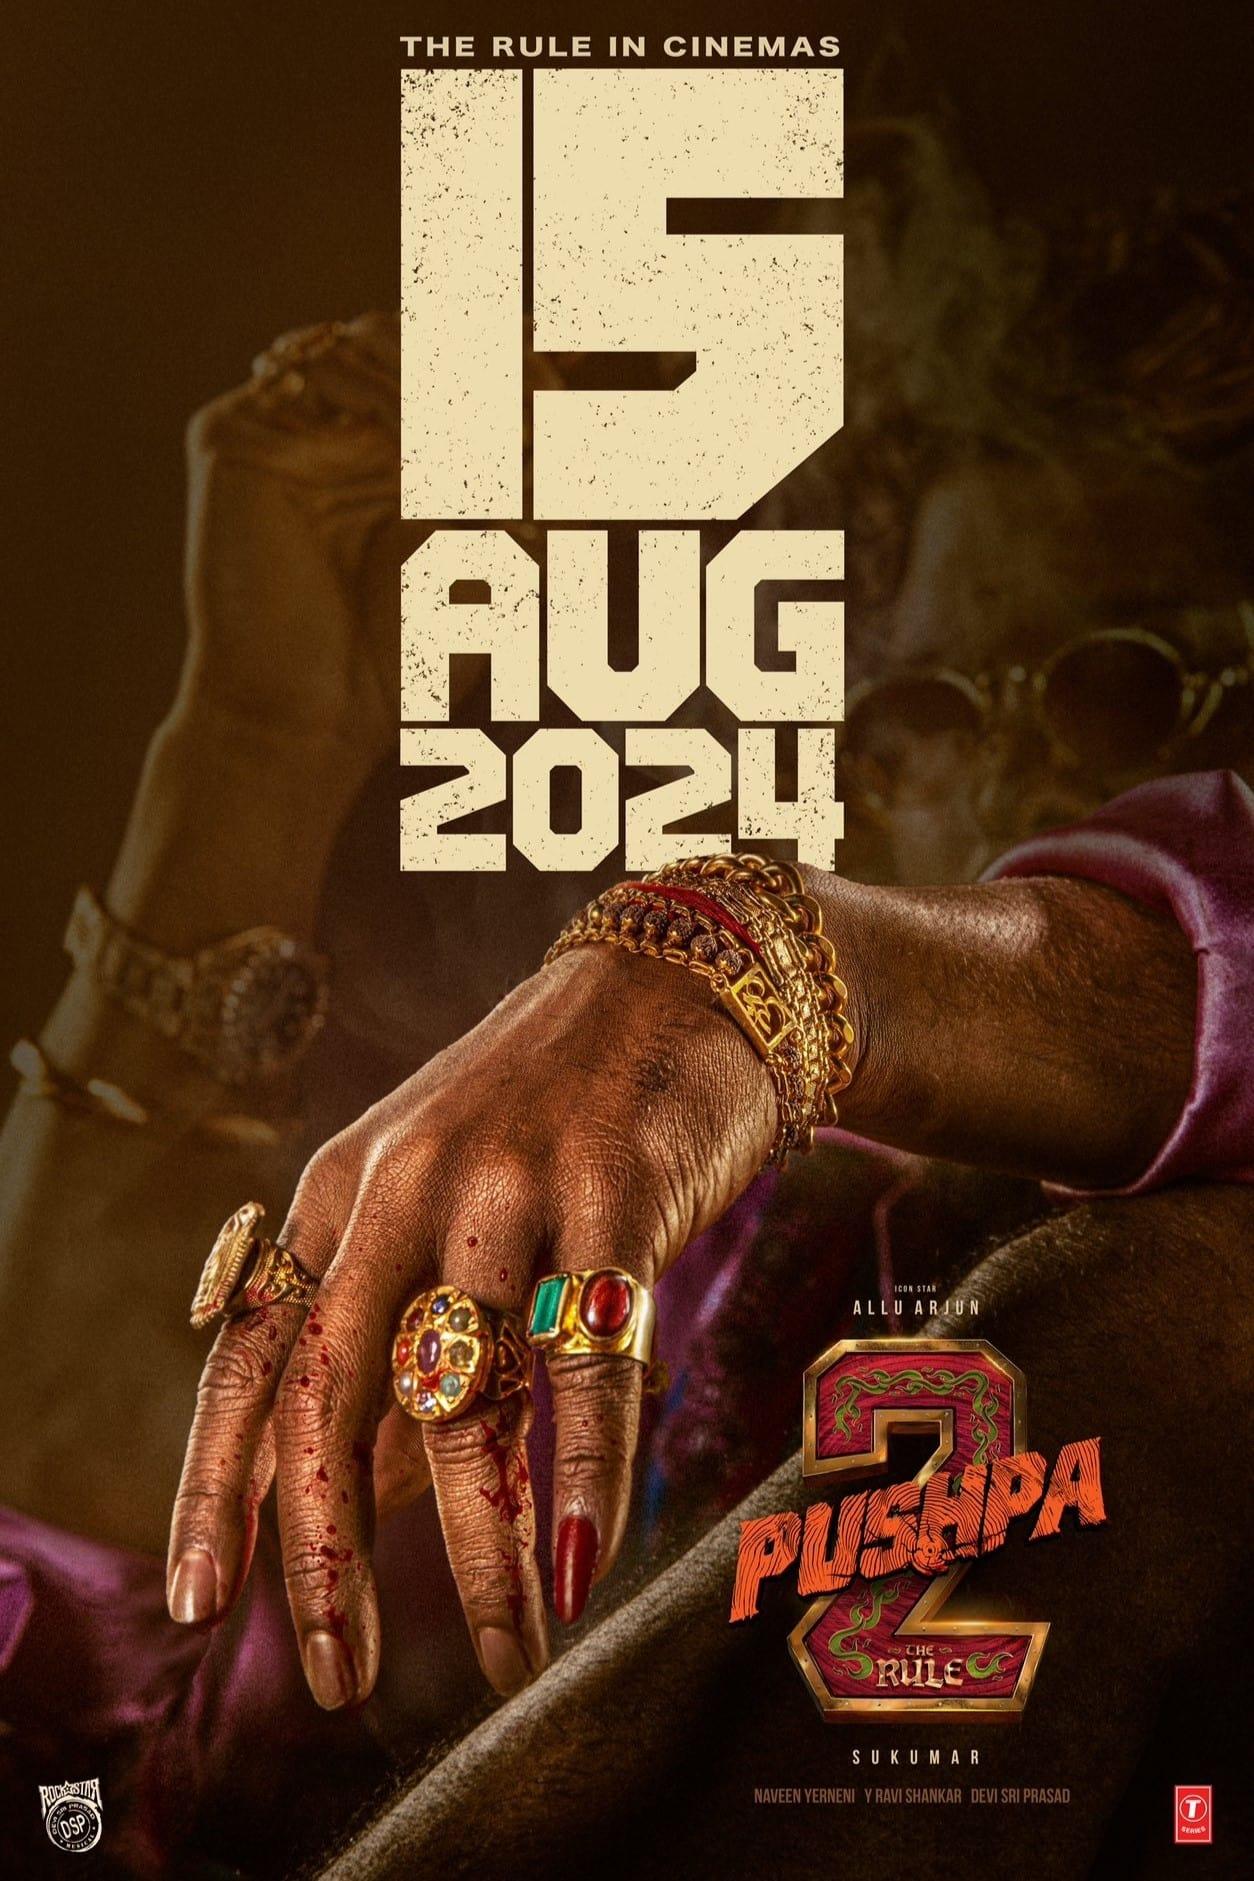 Pushpa 2 - The Rule poster